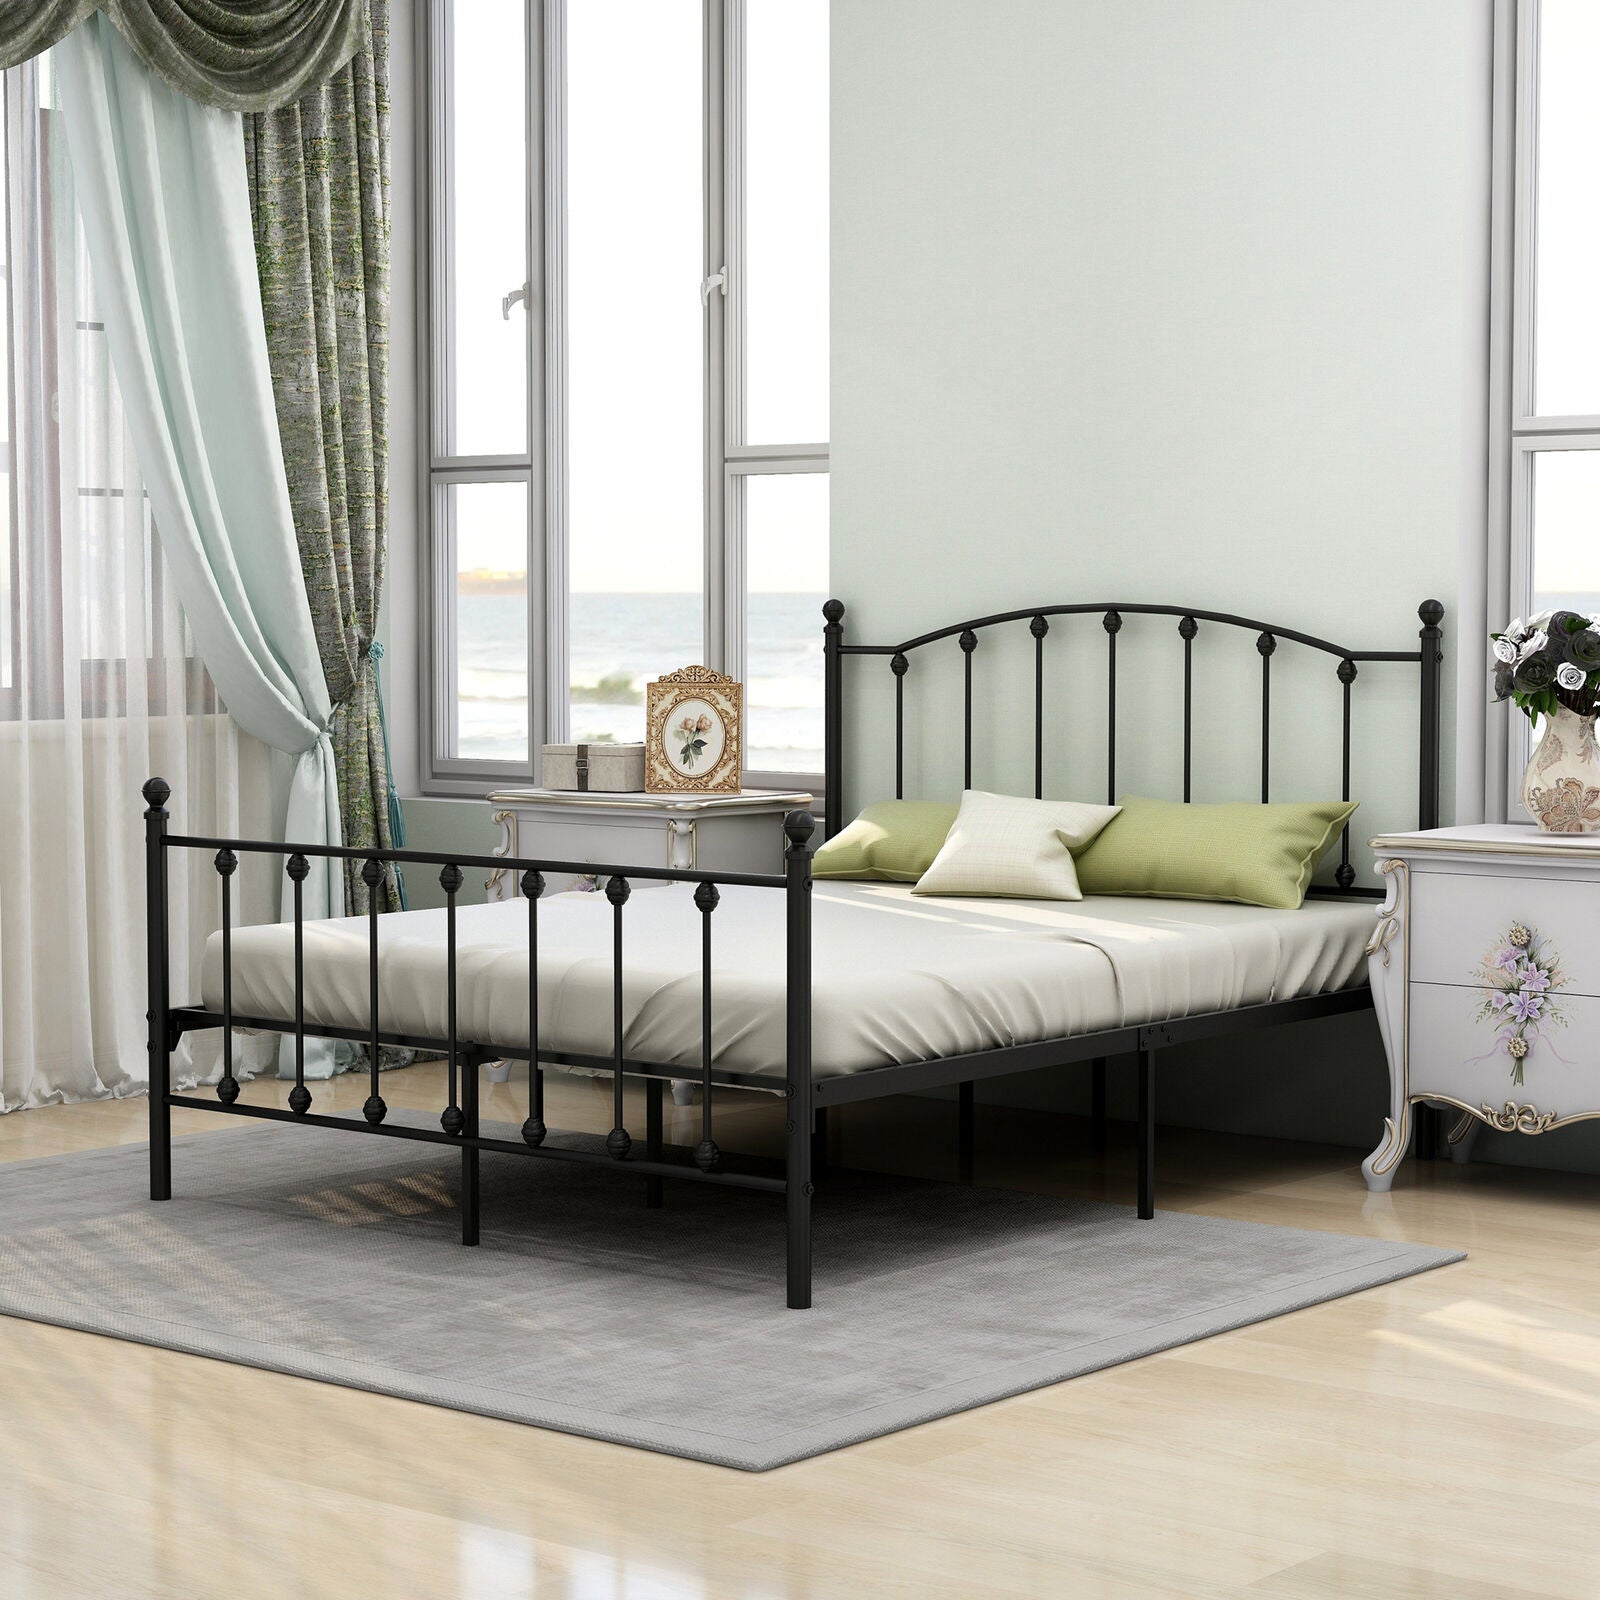 Metal Platform Bed Frame Full Size with Classic Headboard - BLACK  (NC).